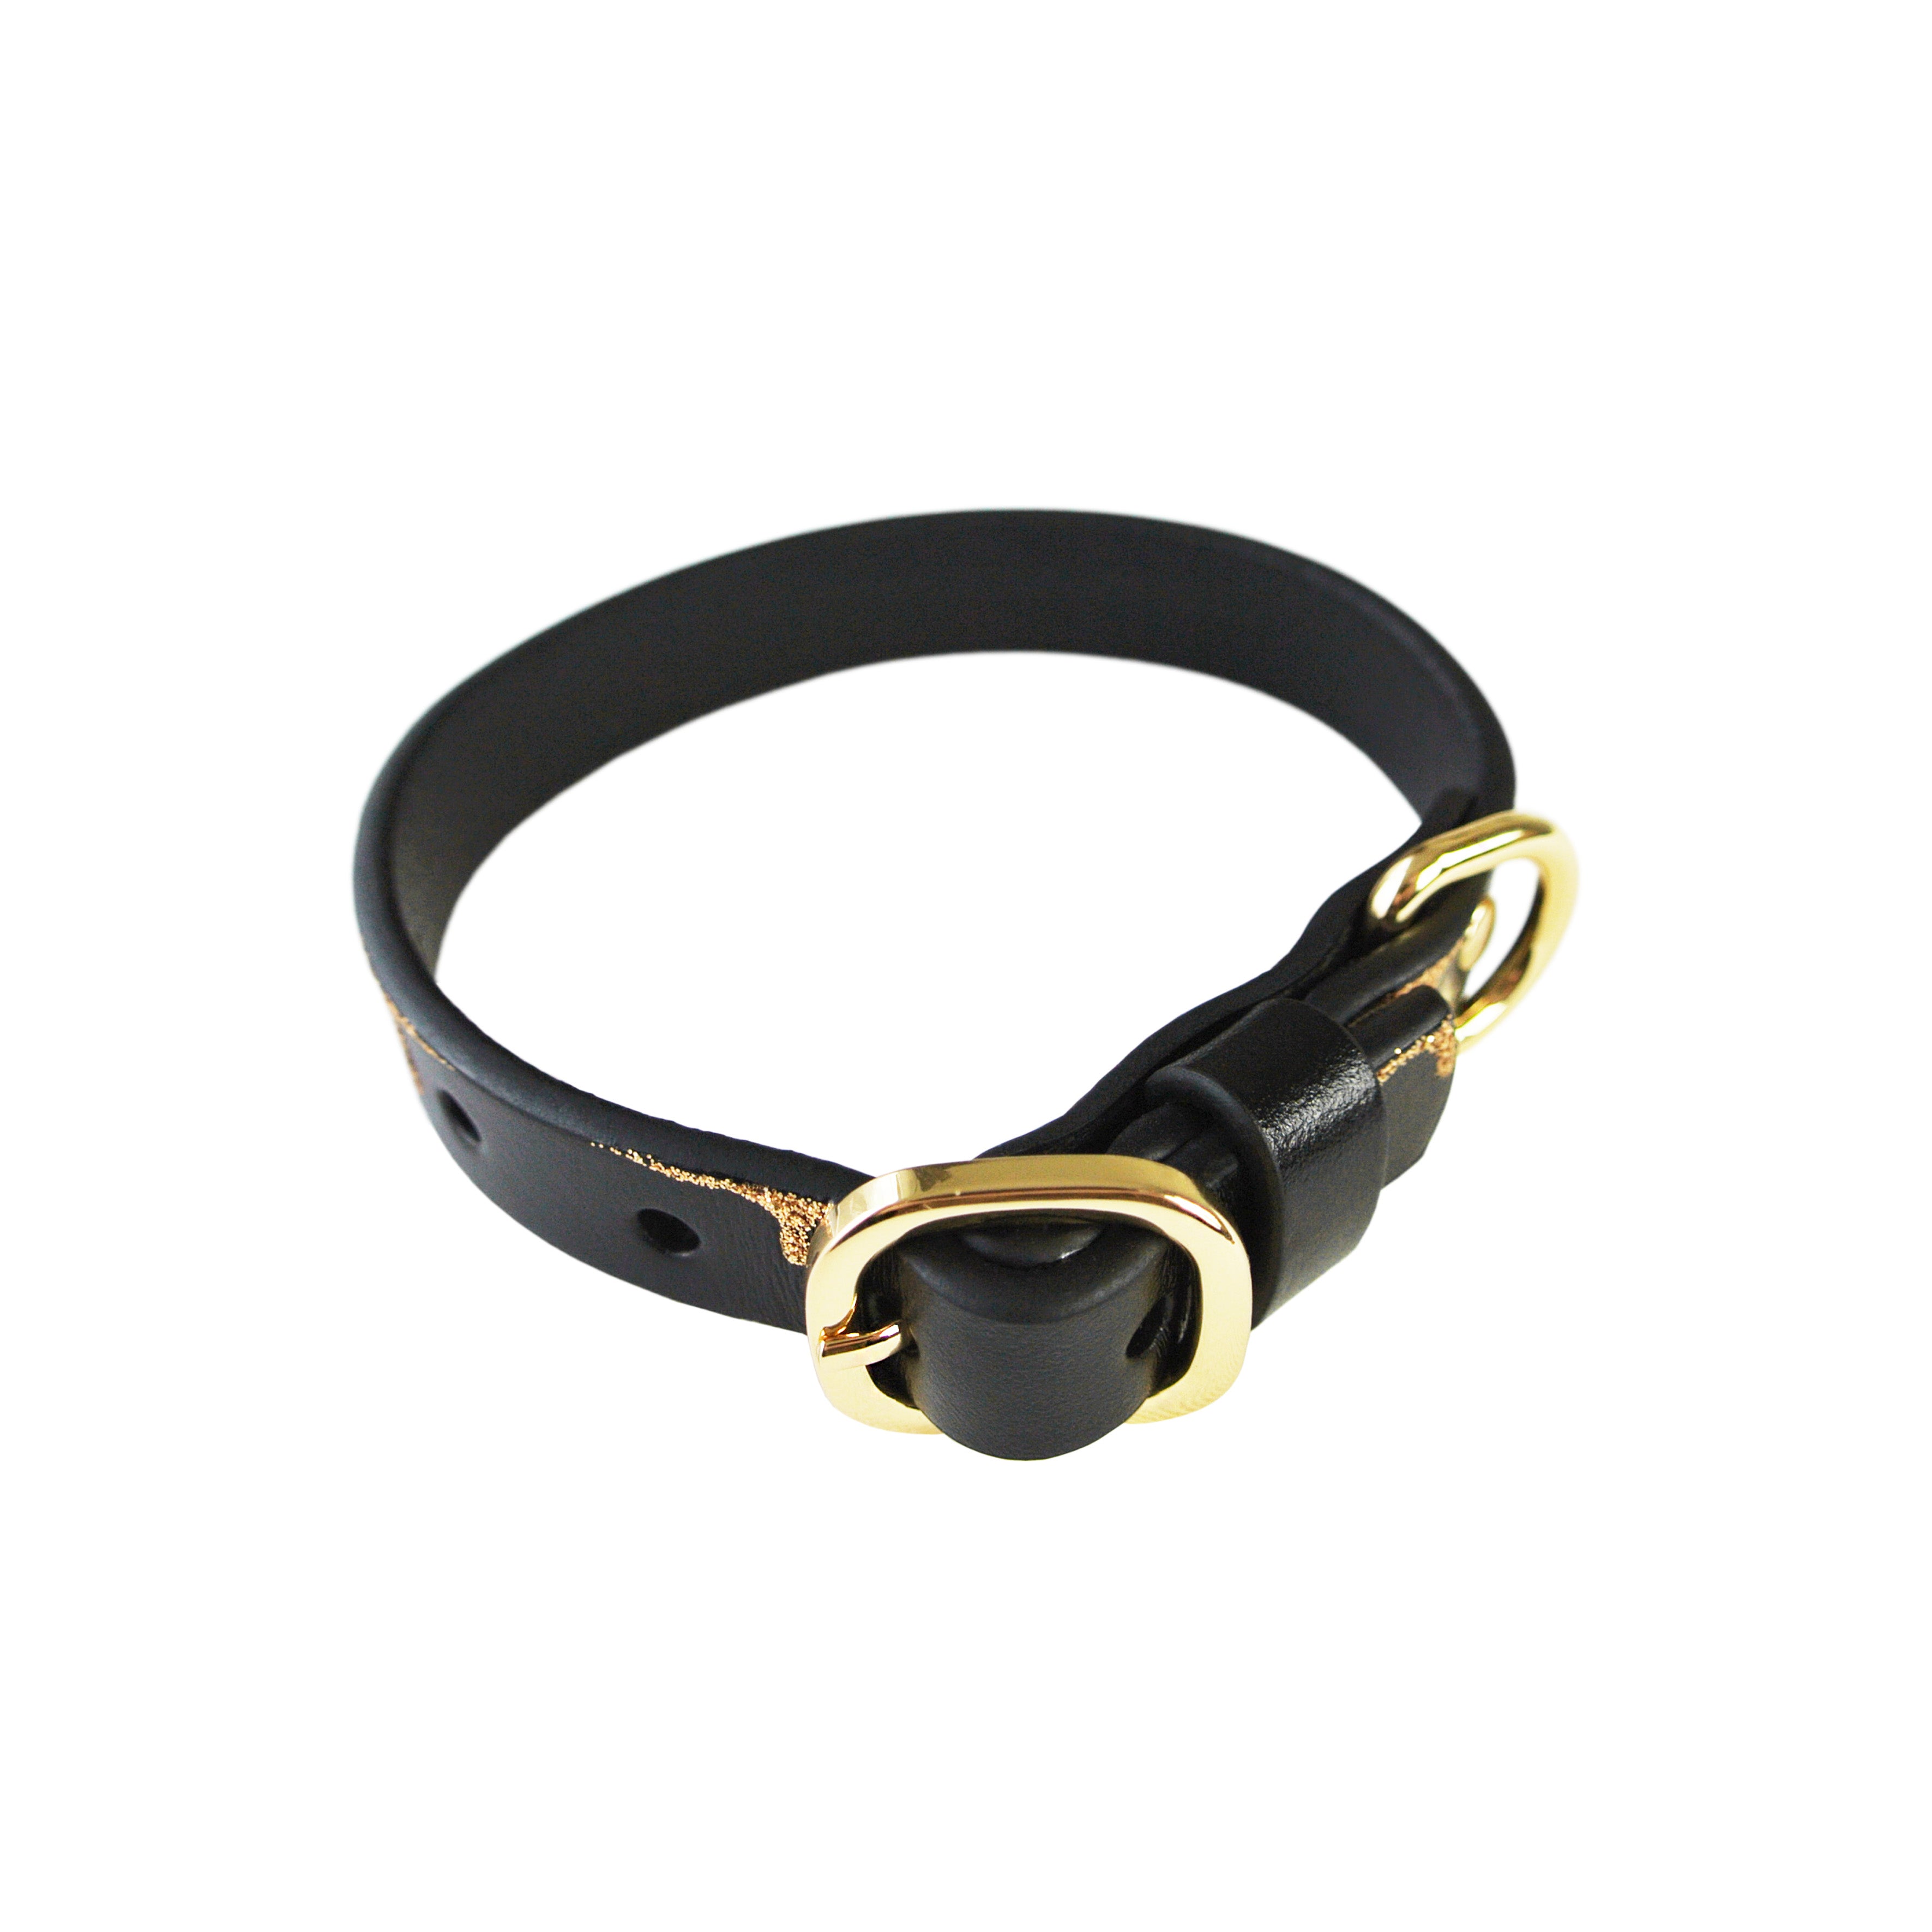 Dripping in Gold Dog Collar - with or without Spikes